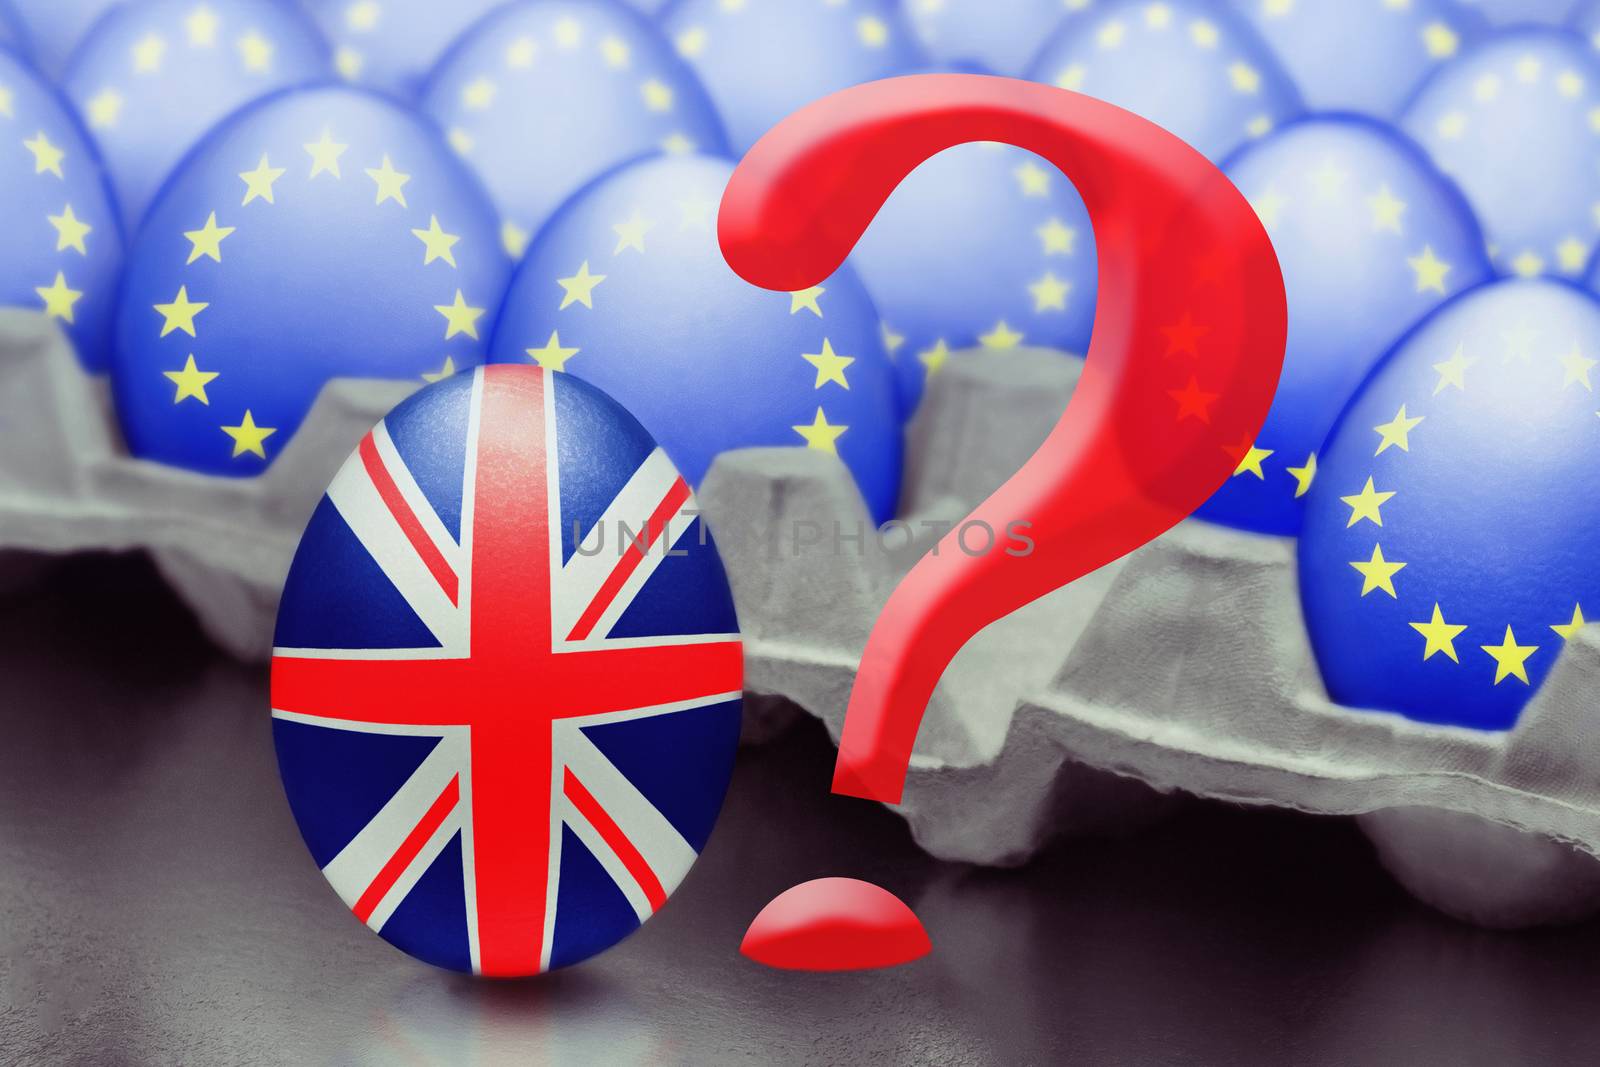 Concept of Brexit is presented from jumping egg with a British flag out of the box with eggs with the flag of the European Union and question mark by galsand